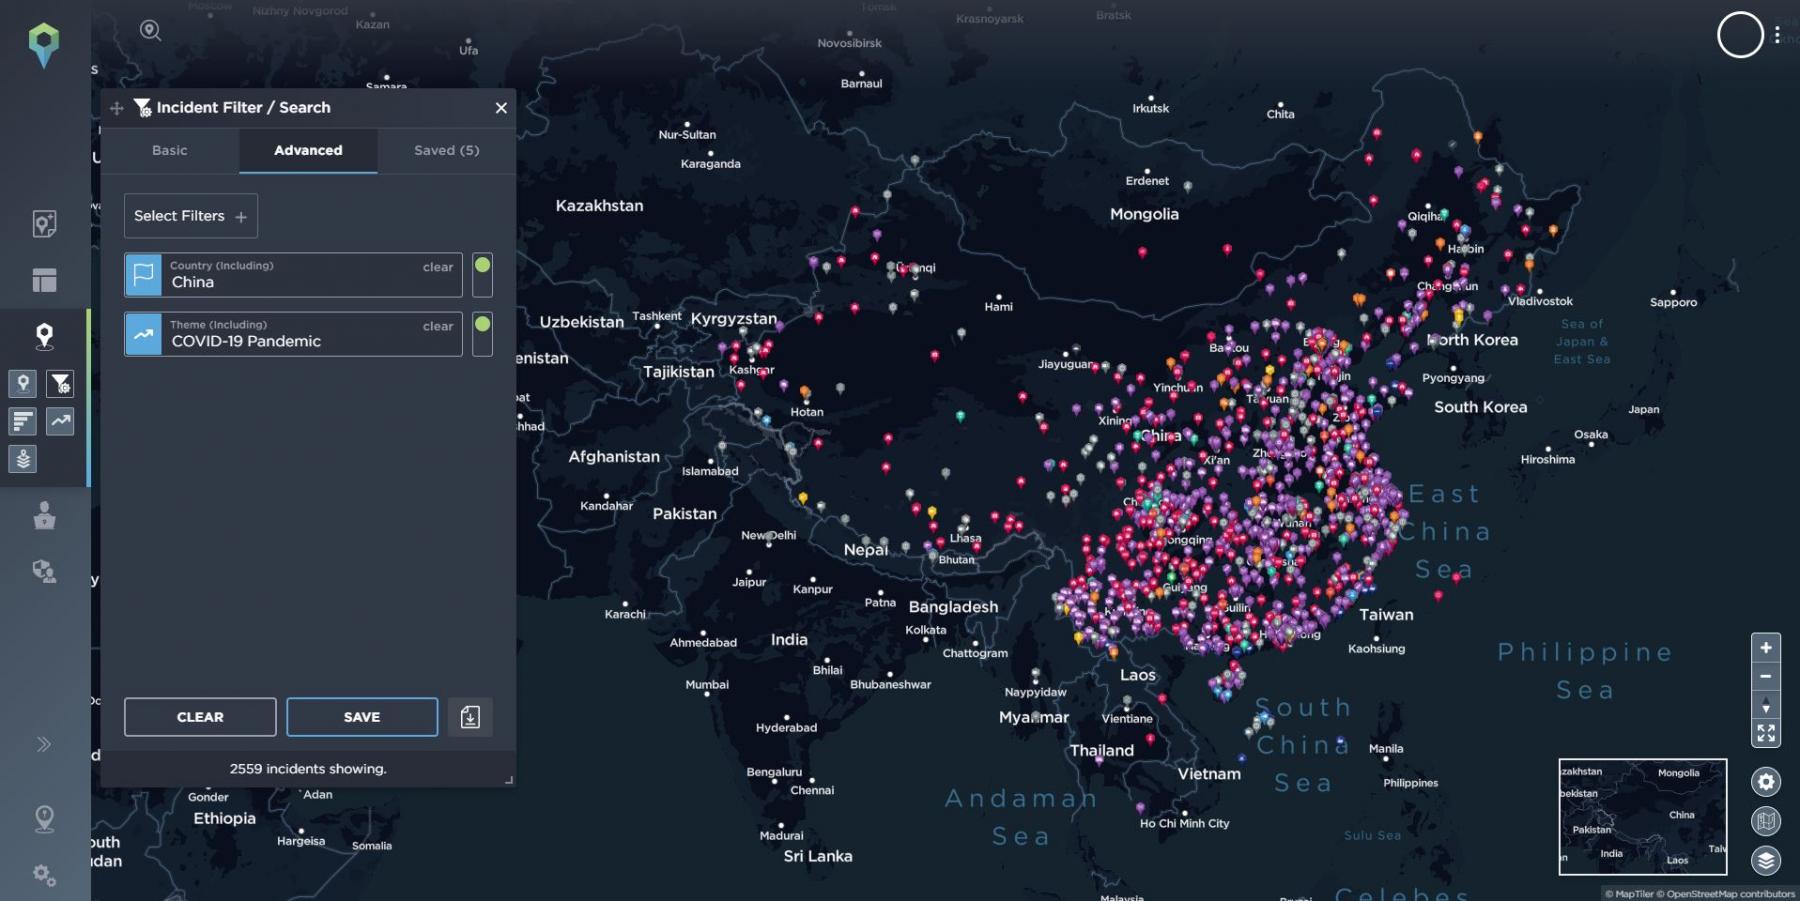 Map showing the COVID-19 related incidents across China since January 2020